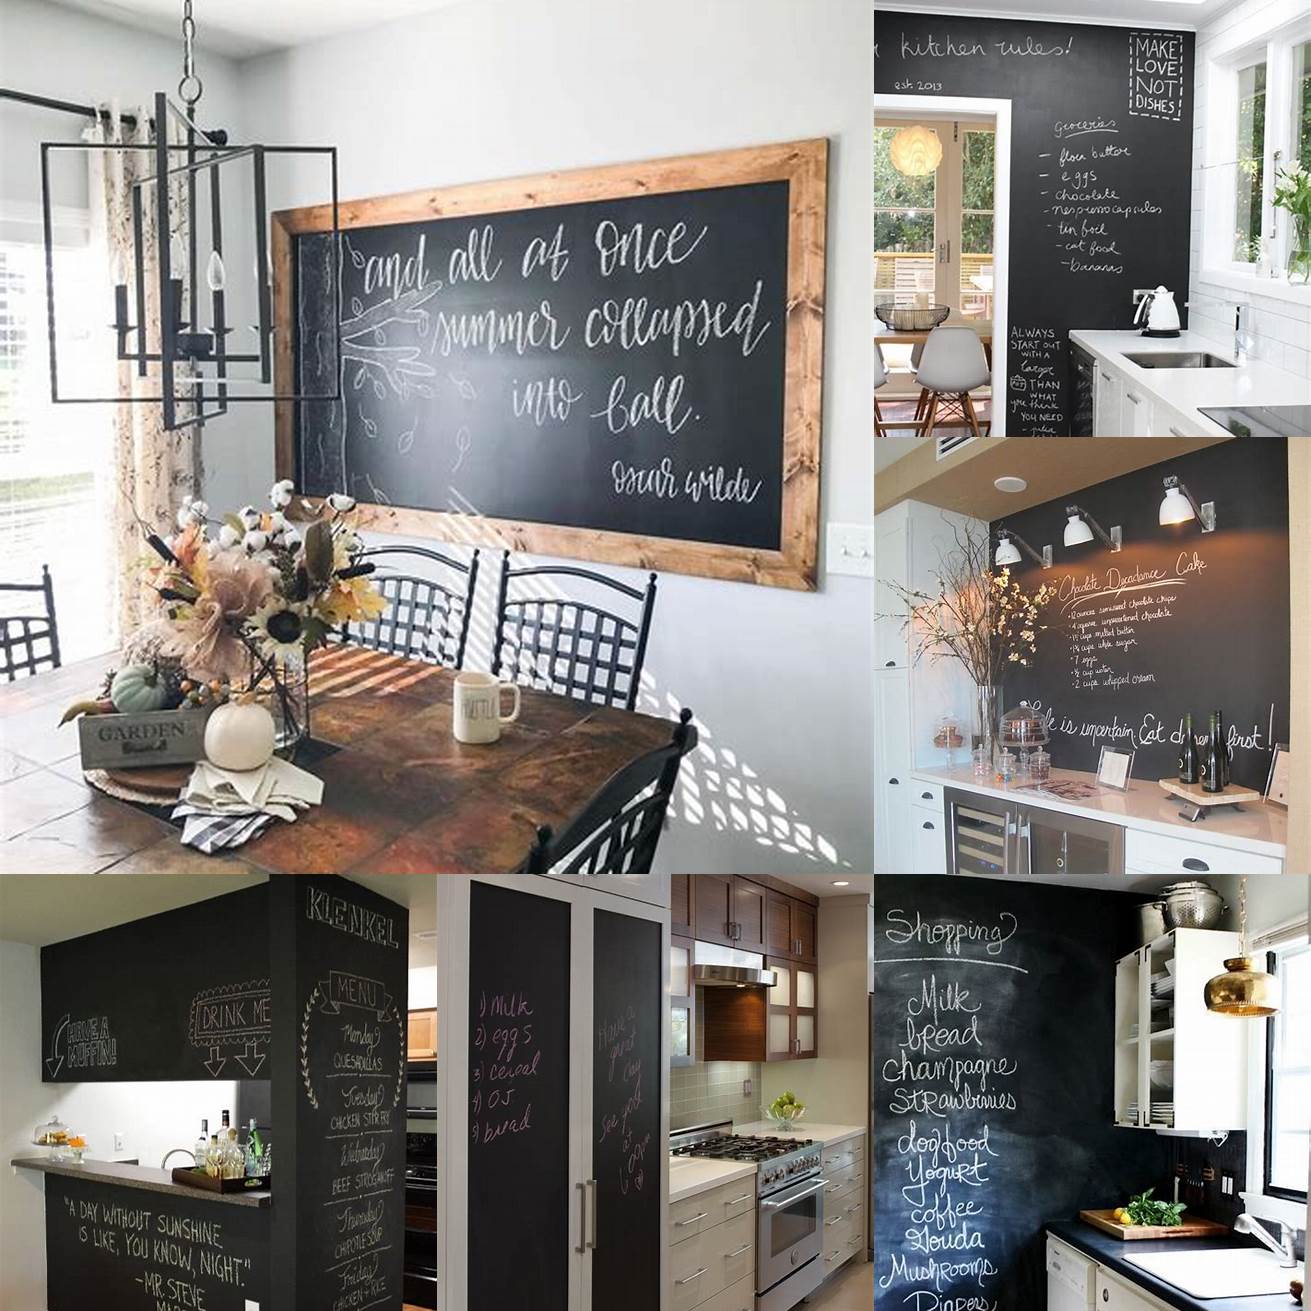 5 Décor Last but not least the kitchen chalkboard adds a rustic and charming touch to the décor of your kitchen It can be customized with different frames and designs to match your style